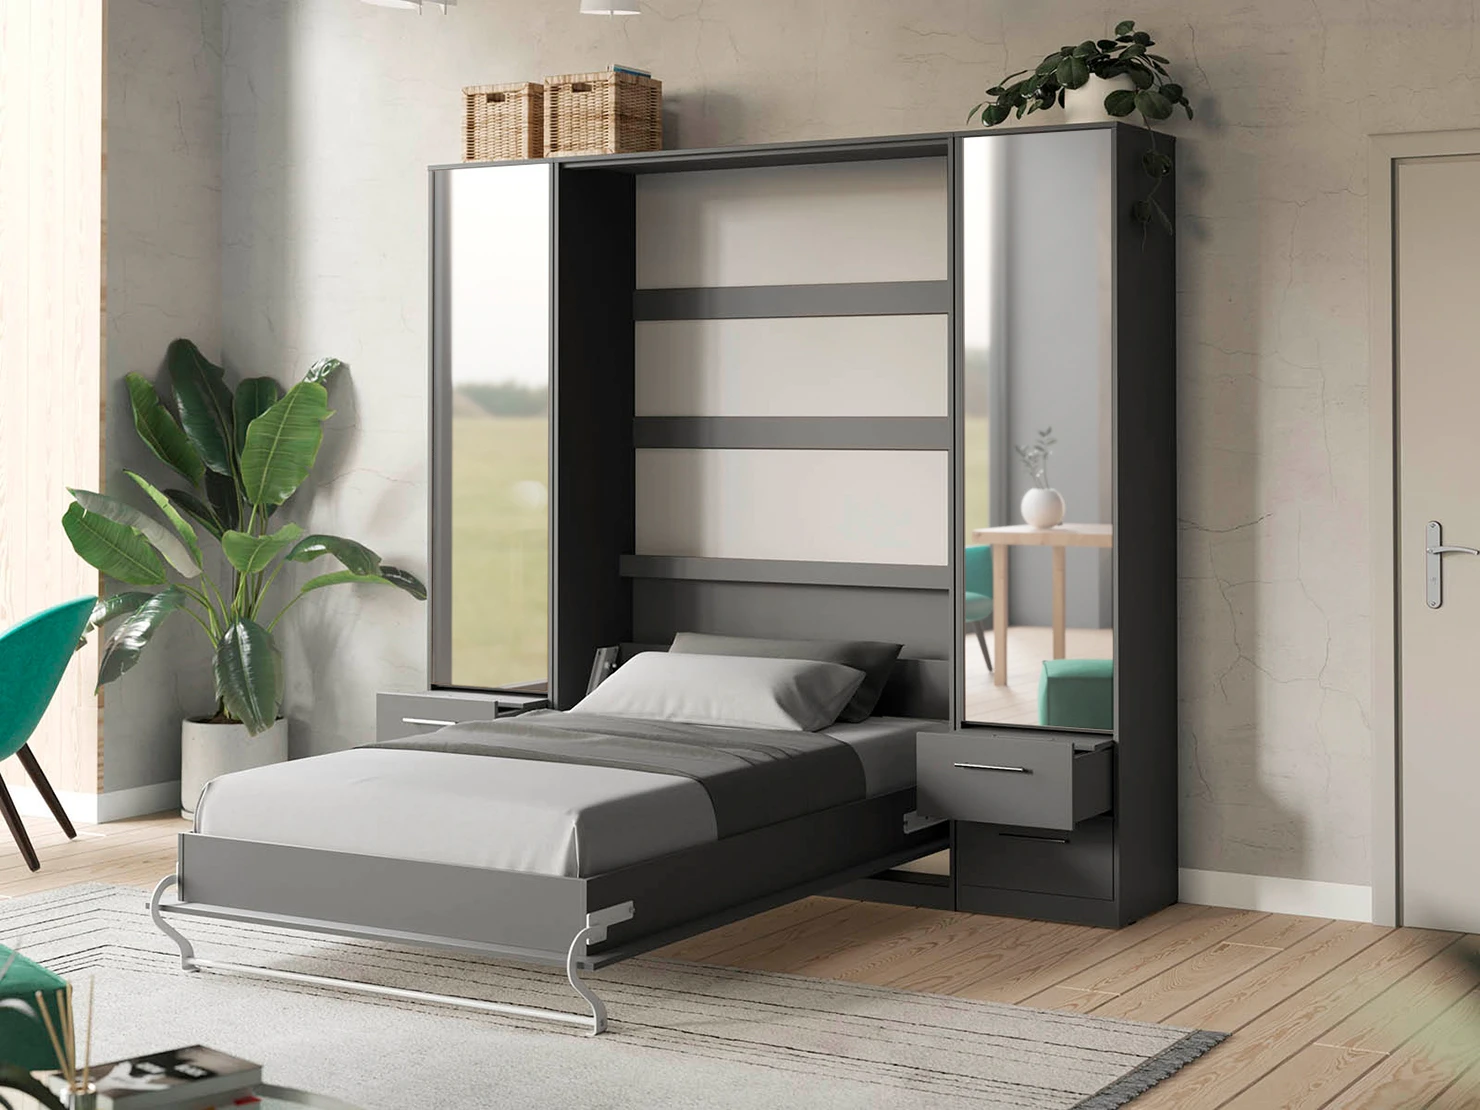 2 Murphy Bed SET 140x200cm Vertical + 2x Cabinets 50cm Anthracite/Anthracite with Mirror